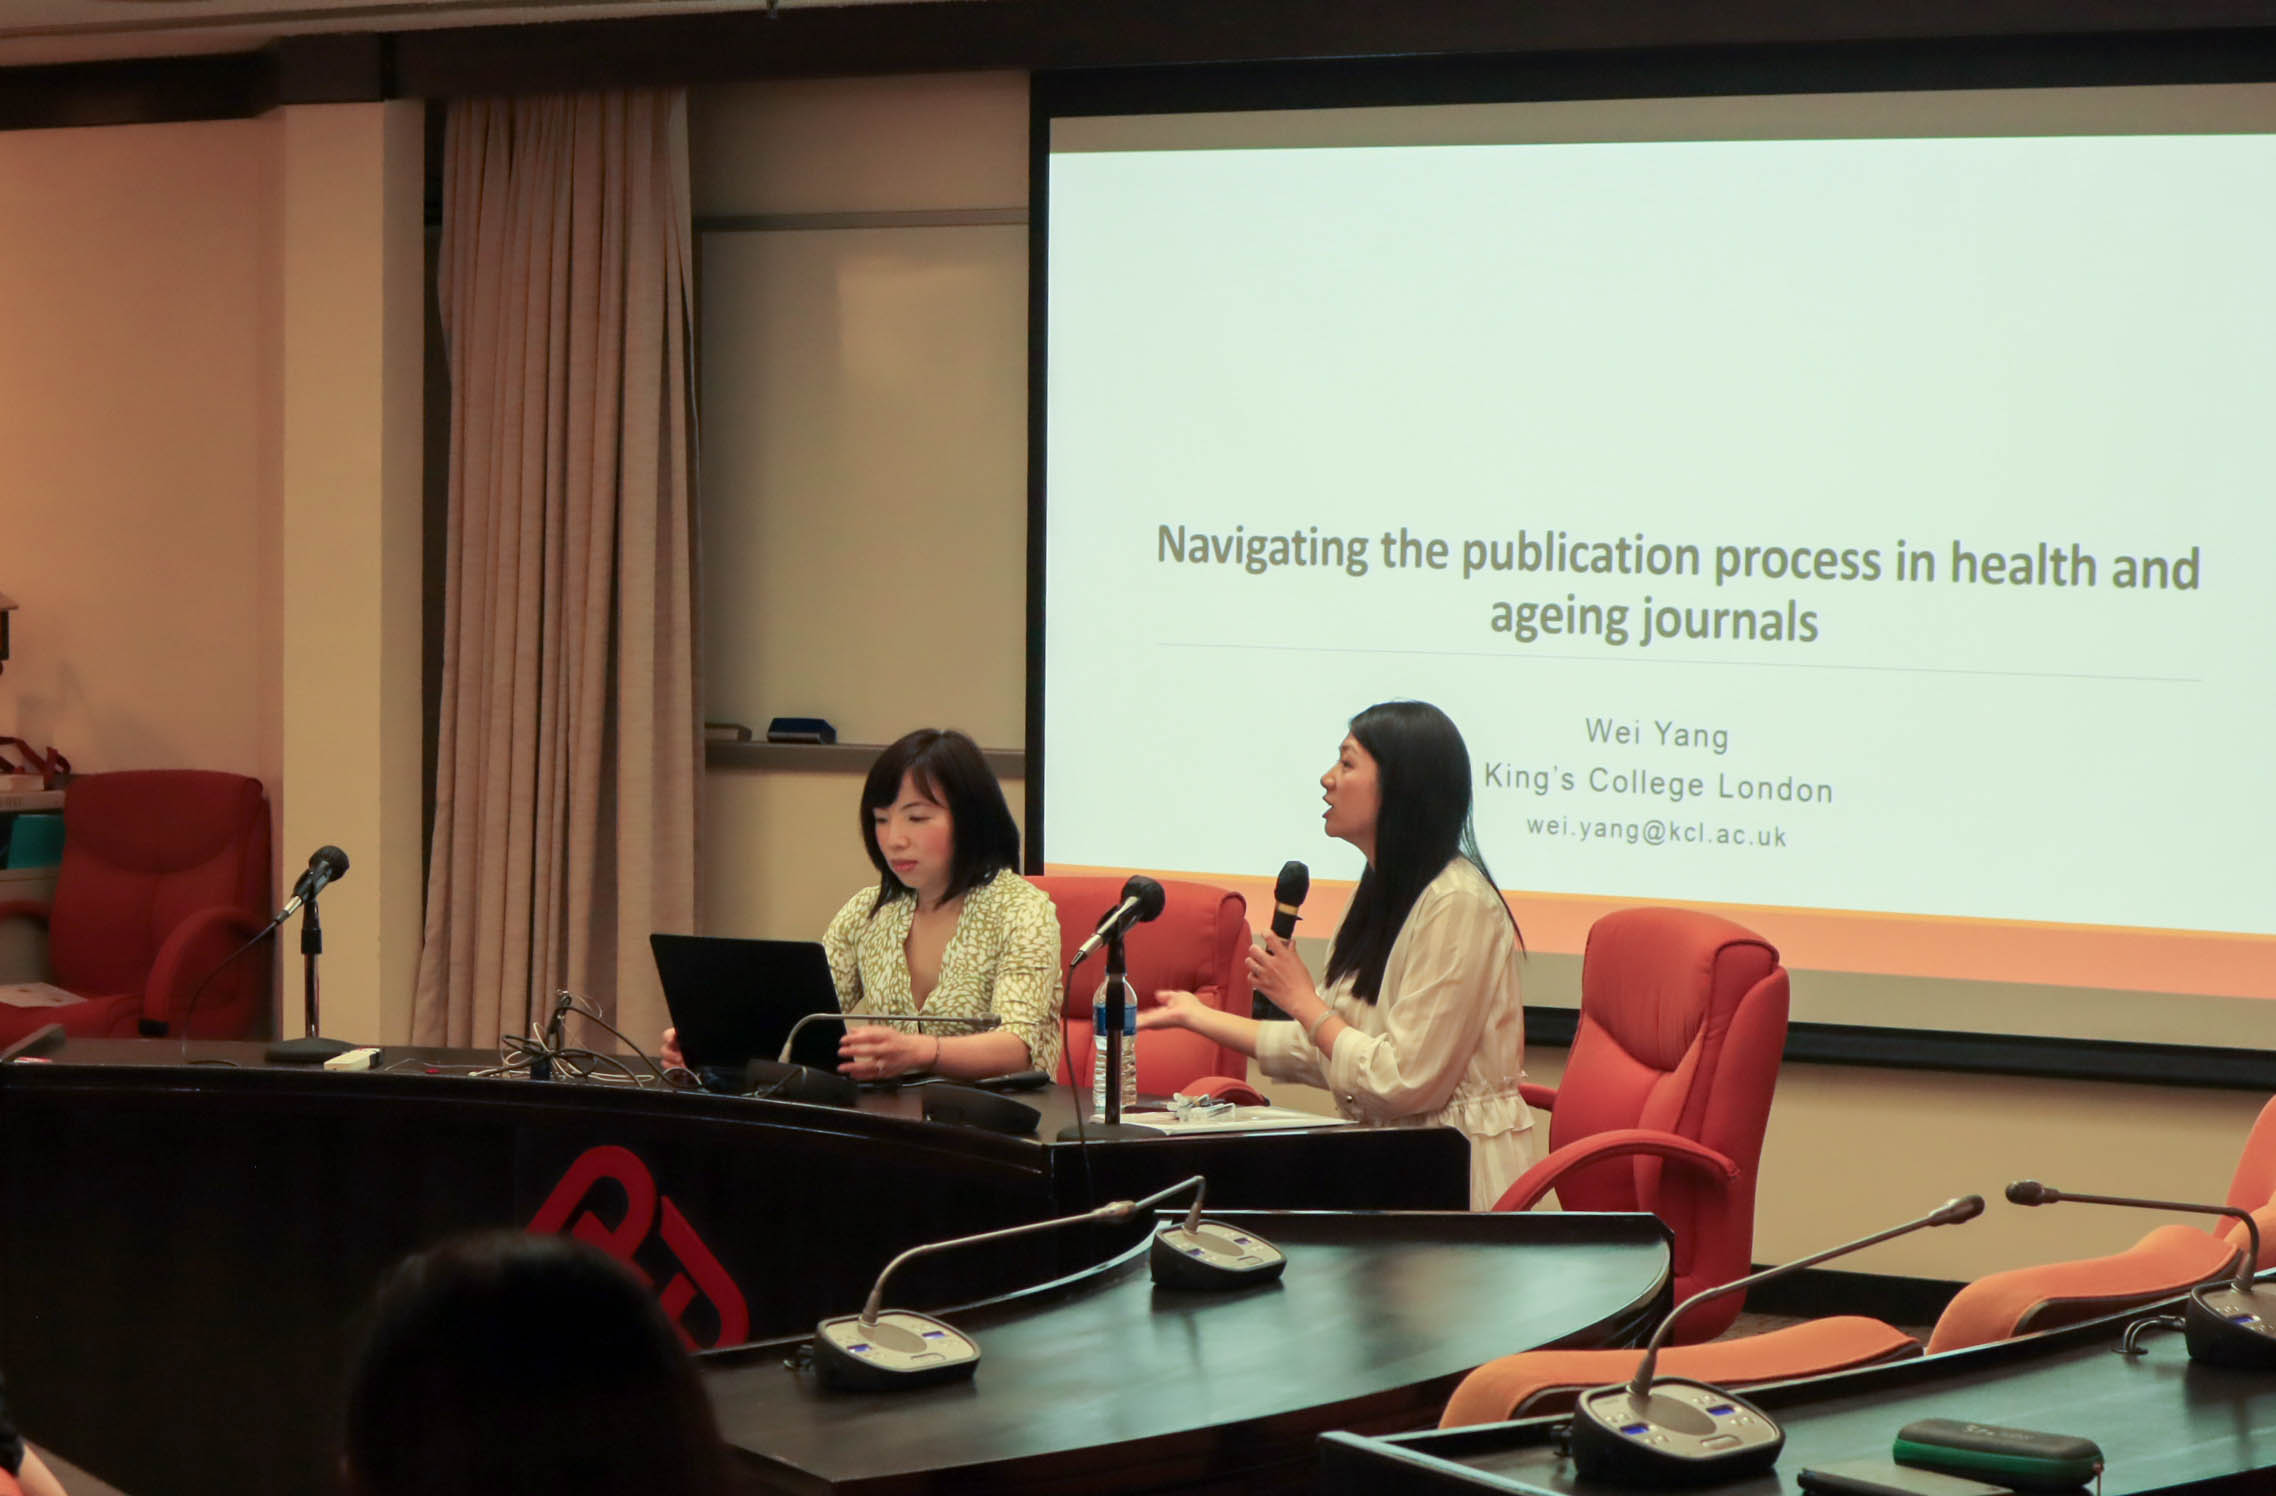 Seminar - Navigating the Publication Process in Health and Ageing Journals